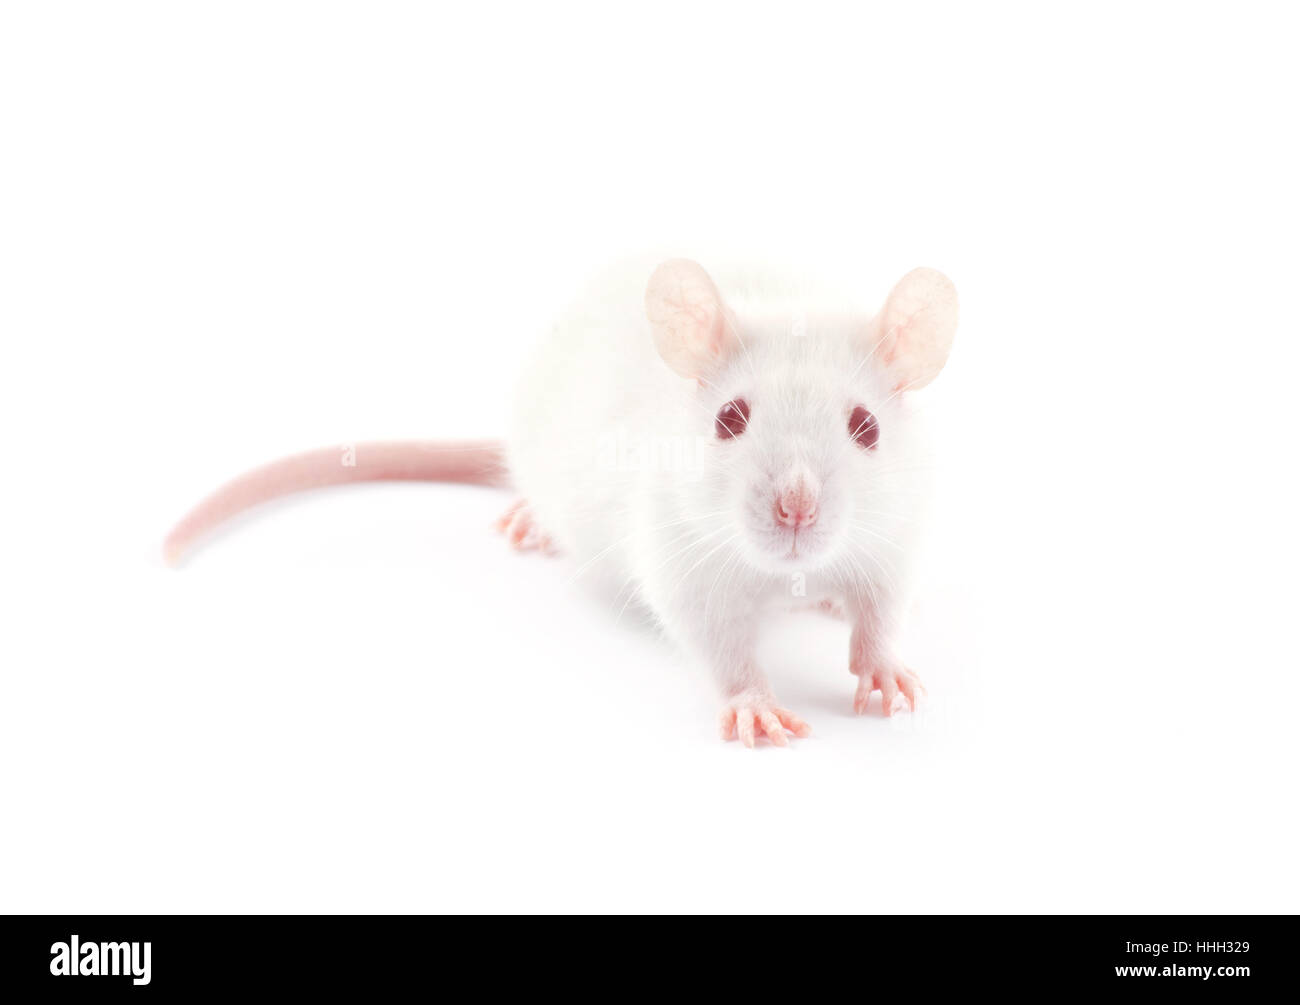 isolated, experiment, animal, pet, mammal, curiosity, rodent, fur, look, Stock Photo